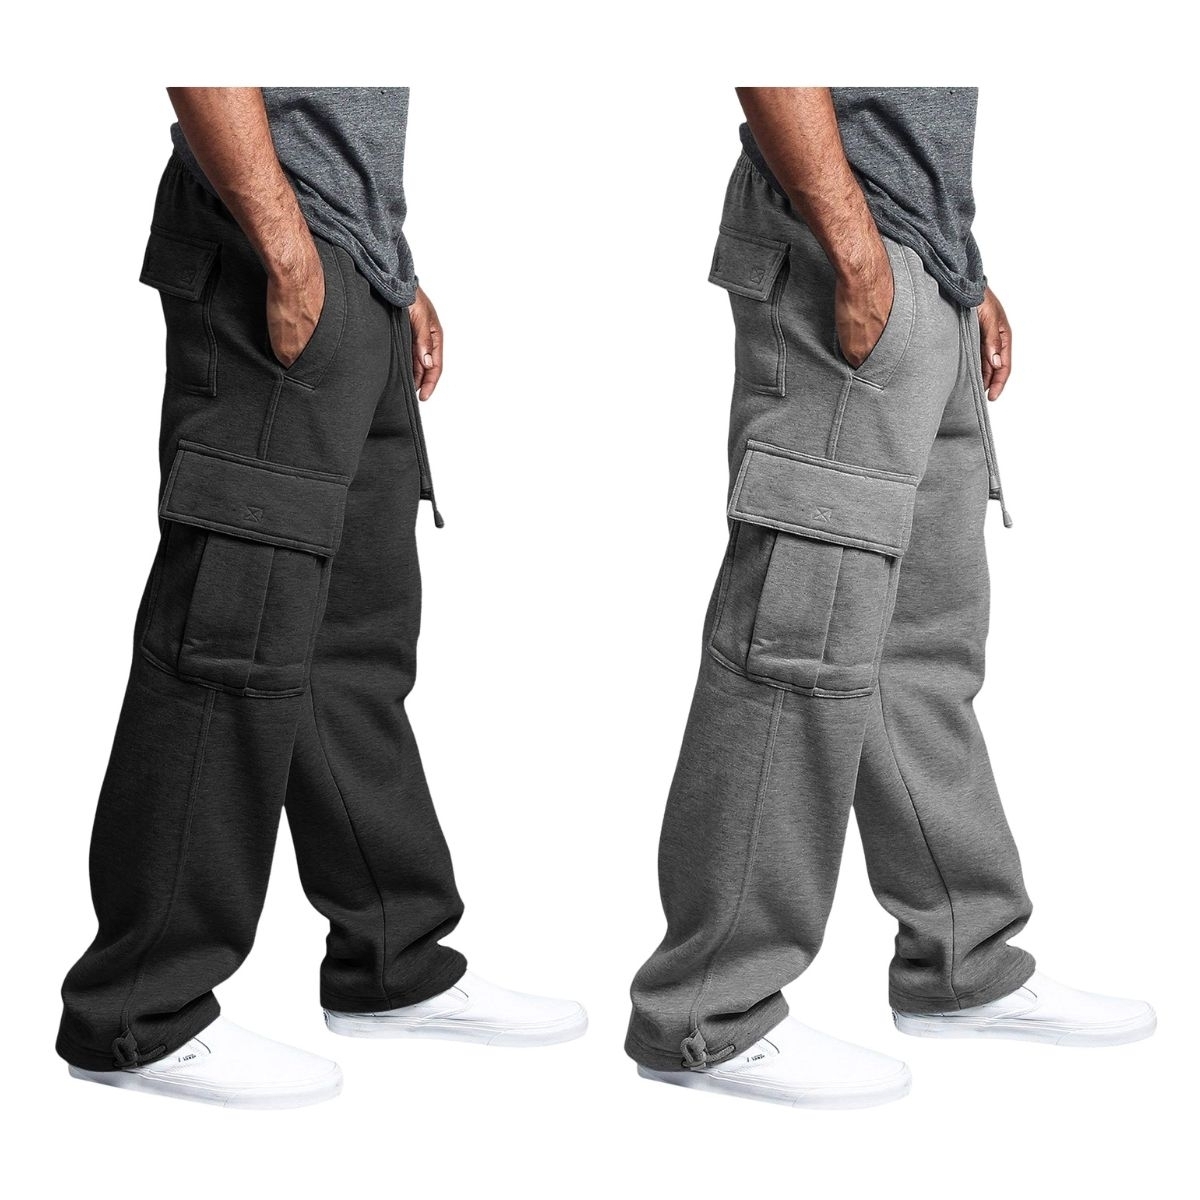 2-Pack: Men's Casual Solid Fleece Lined Cargo Jogger Soft Sweatpants With Pockets - Black&black, Small